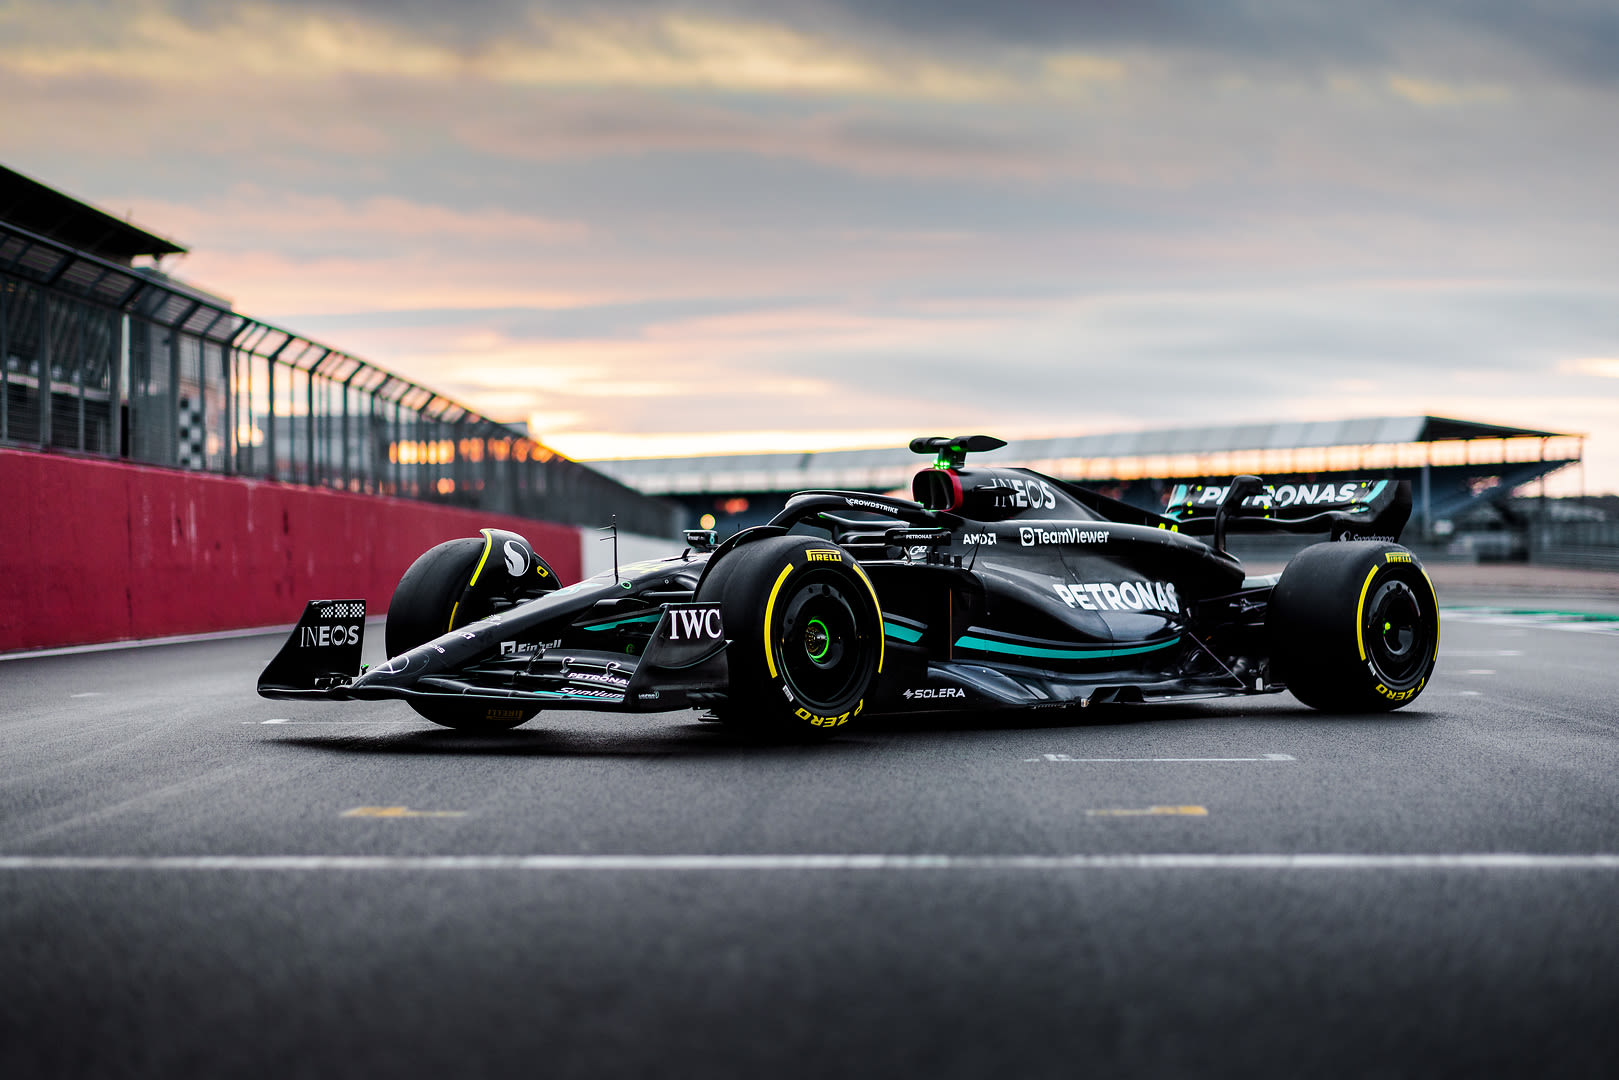 Wallpapers by Mercedes - Mercedes-AMG PETRONAS F1